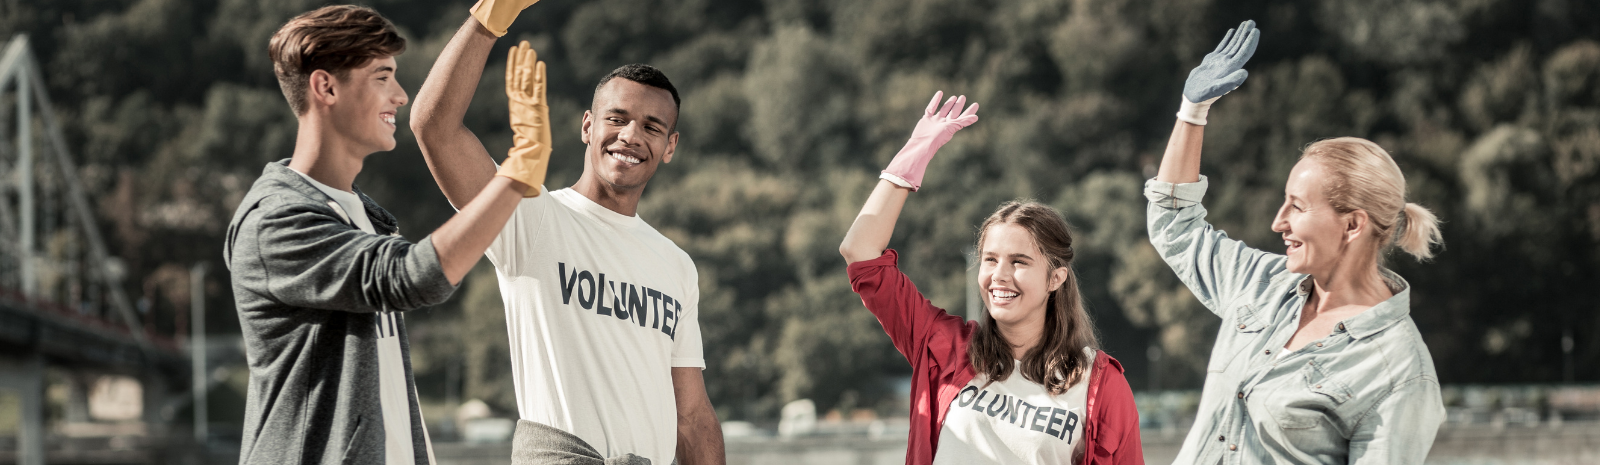 Volunteers giving each other a high five